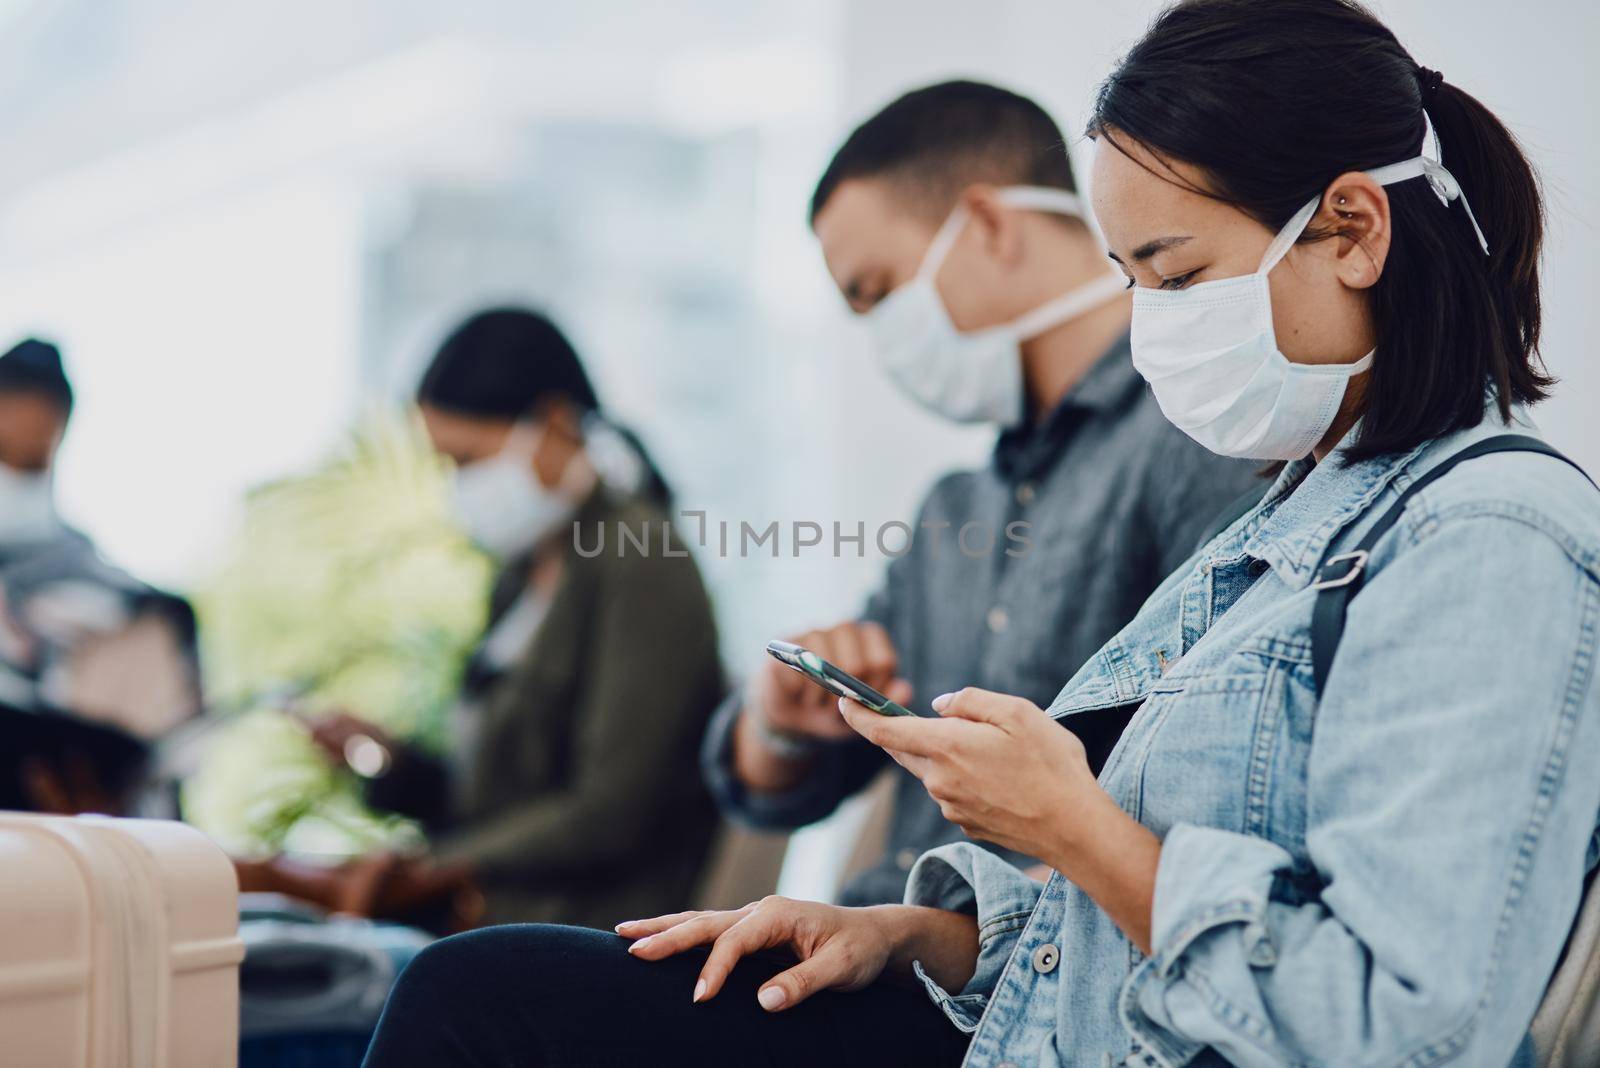 Female tourist on phone traveling during covid at airport waiting for departure, wearing a mask for protection. For hygiene and healthcare security, follow corona virus social distance regulations